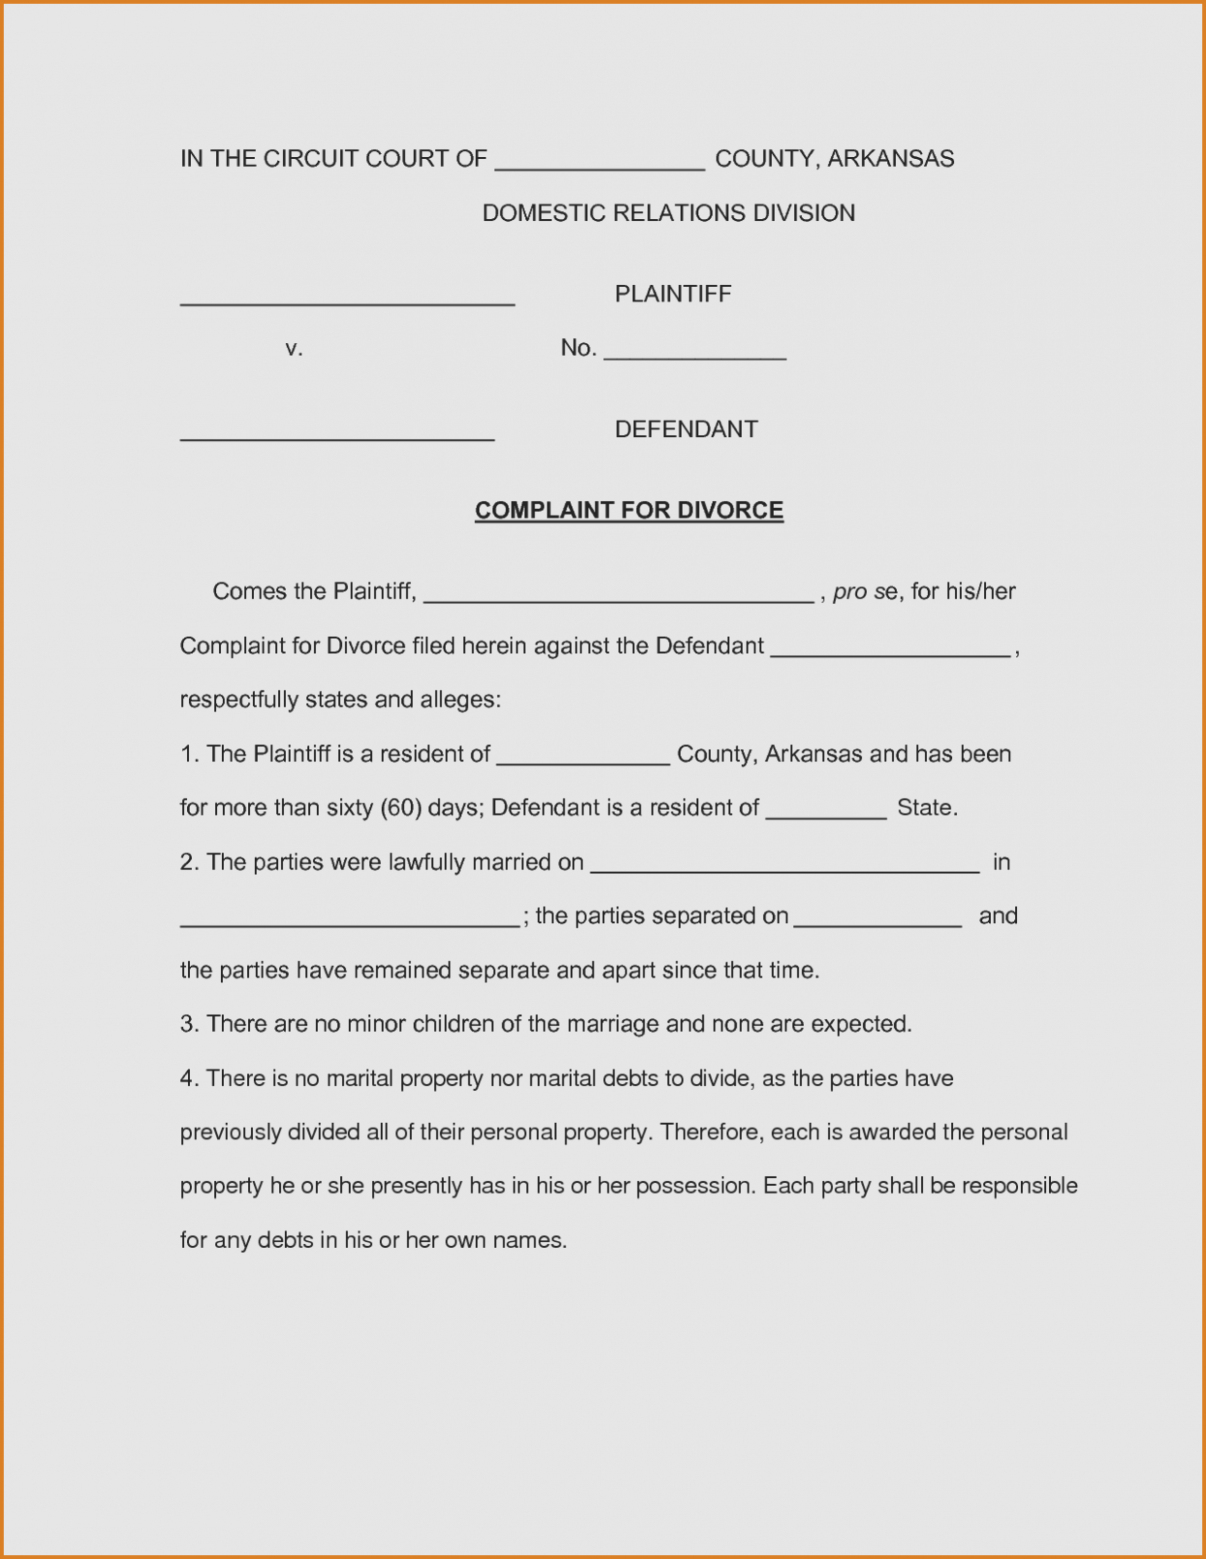 divorce-papers-where-can-i-get-divorce-papers